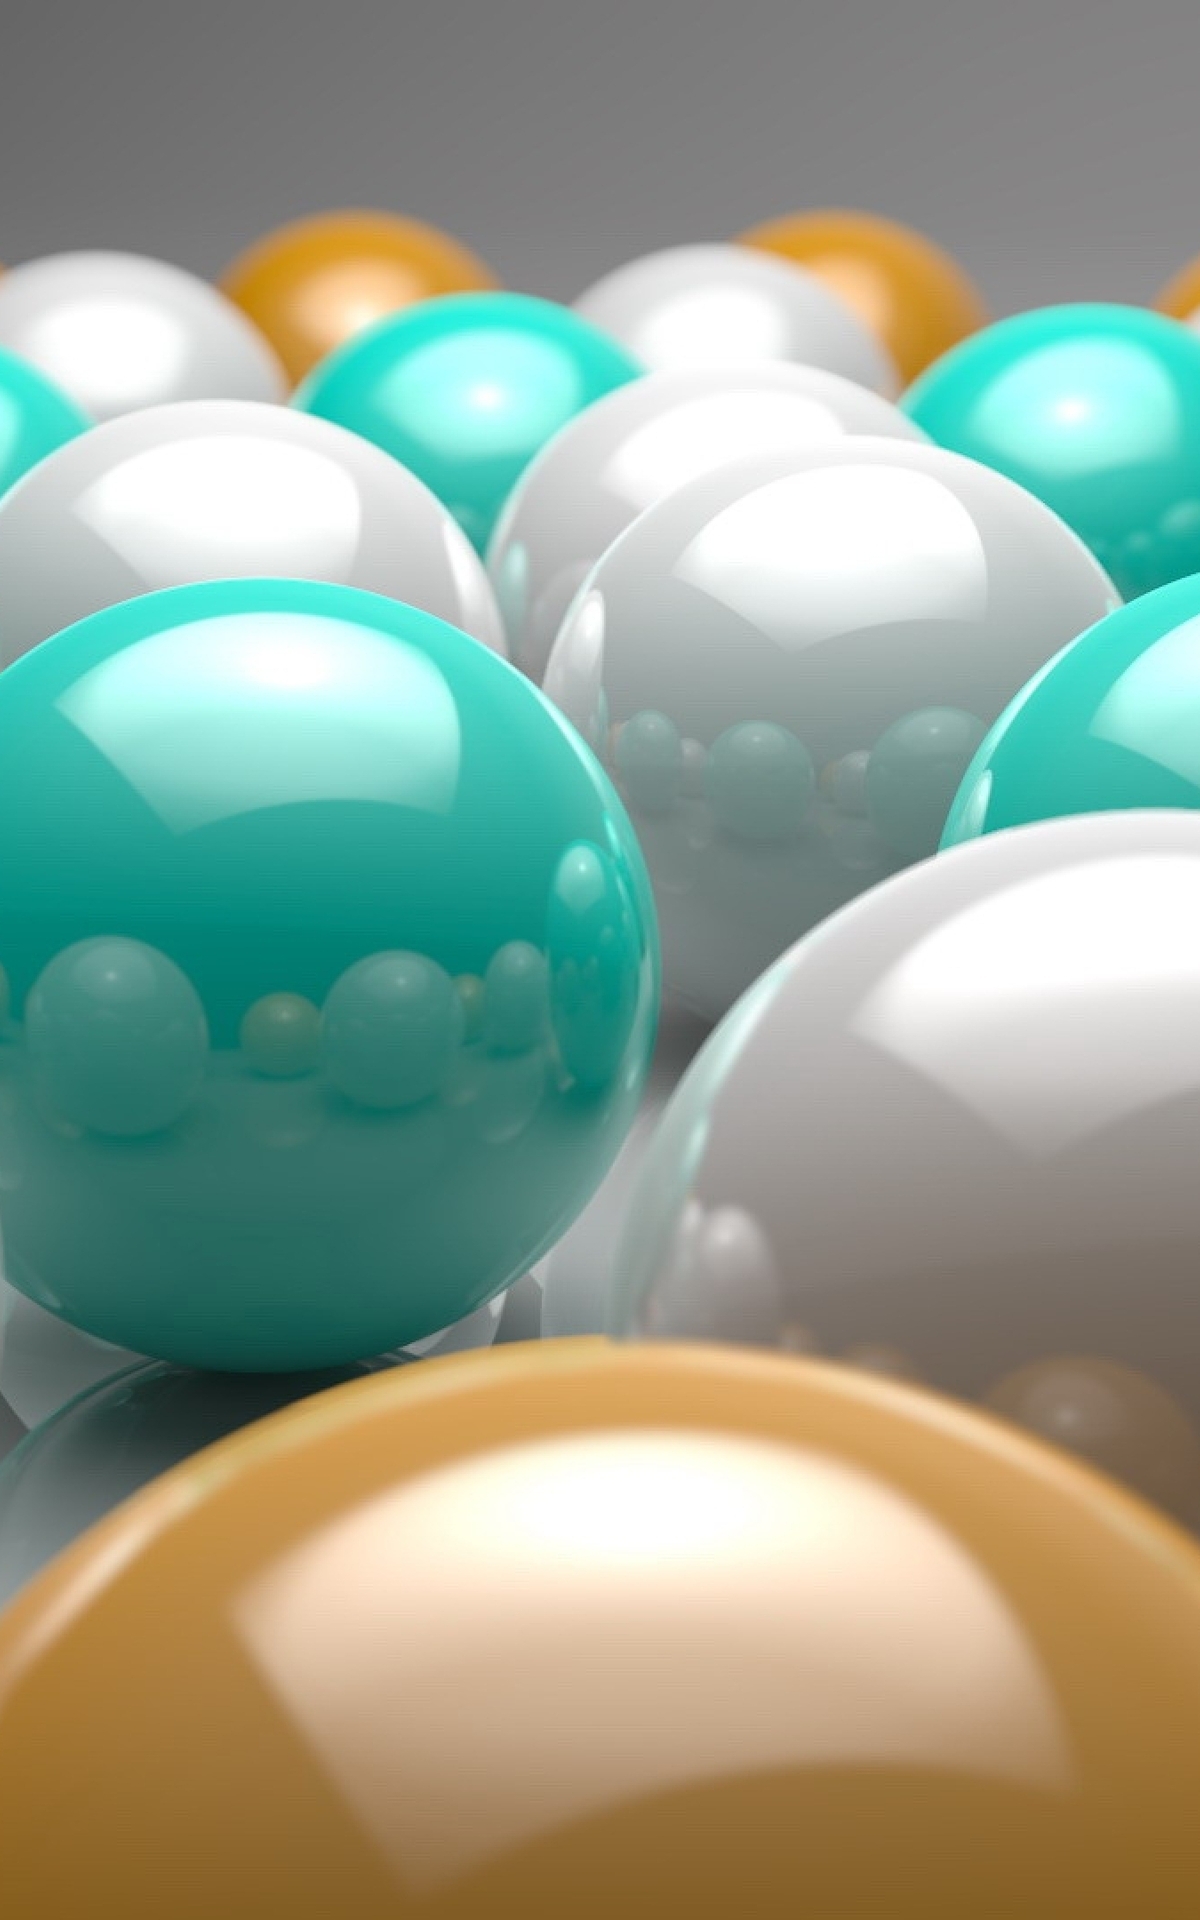 Image: Balls, color, white, yellow, turquoise, reflection